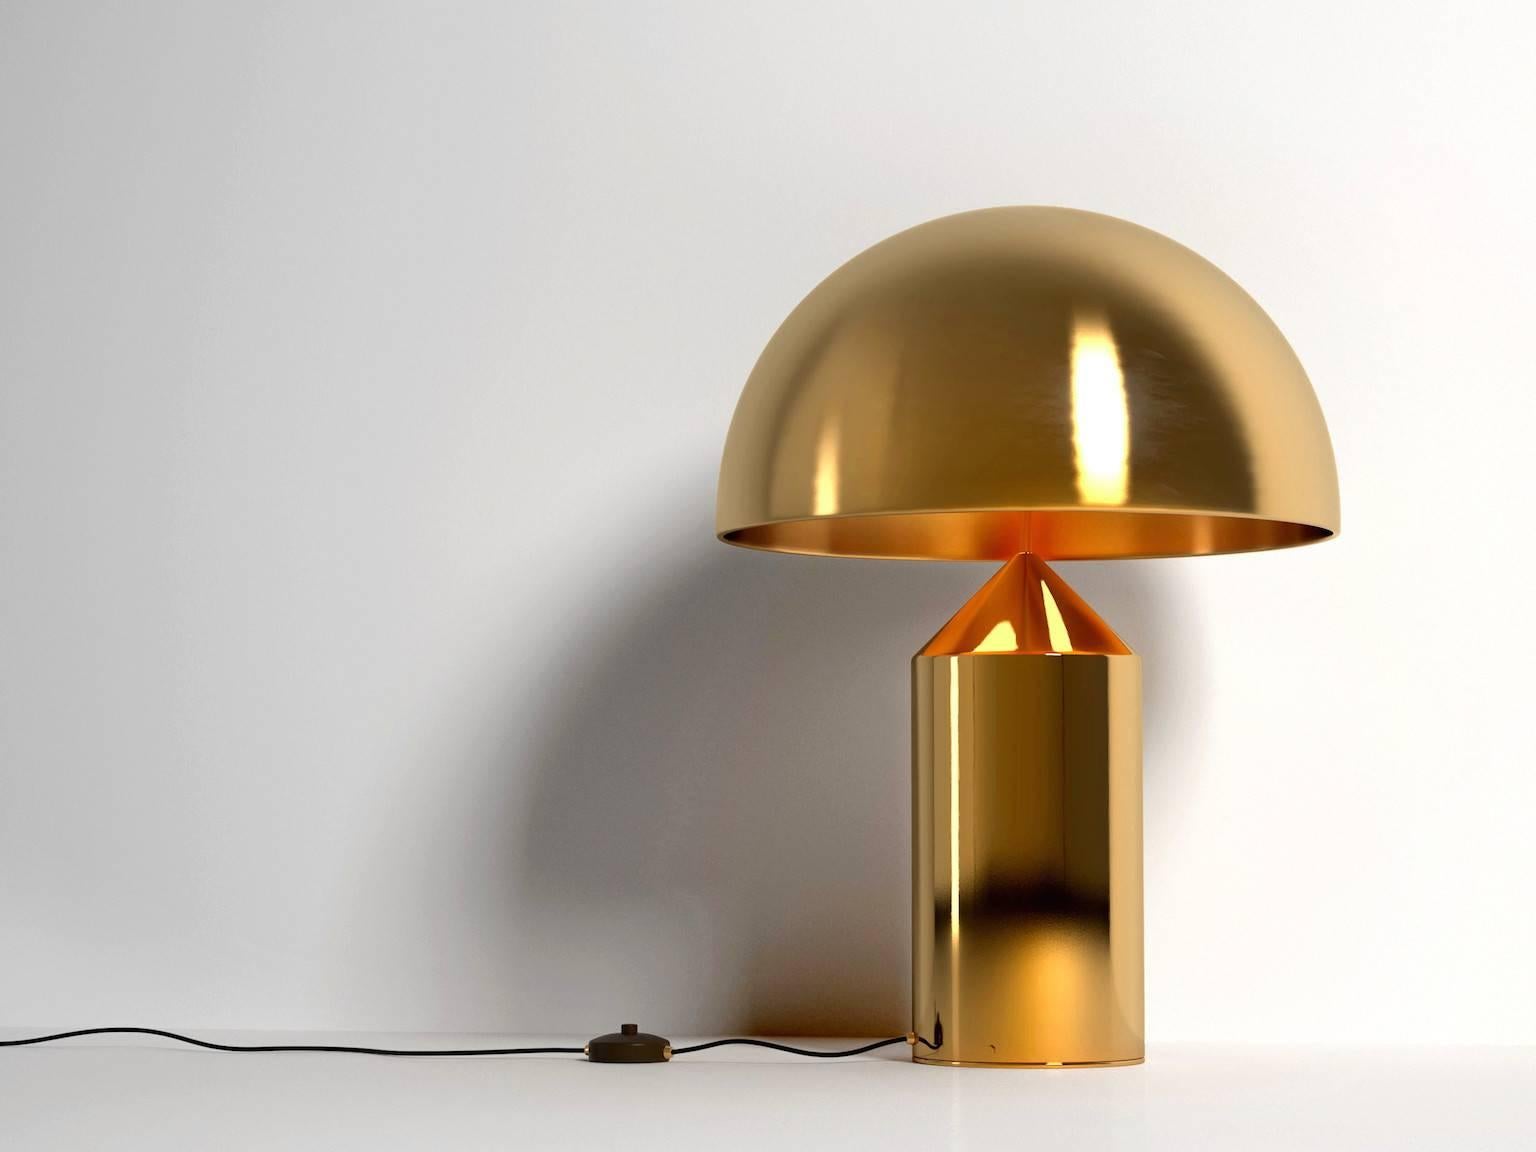 Iconic Atollo model 239 table lamp originally designed by Vico Magistretti for Oluce in 1977. This current production provides direct light as a table or bedside lamp. Comes in a gloss black painted aluminum finish or satin gold galvanic finish or